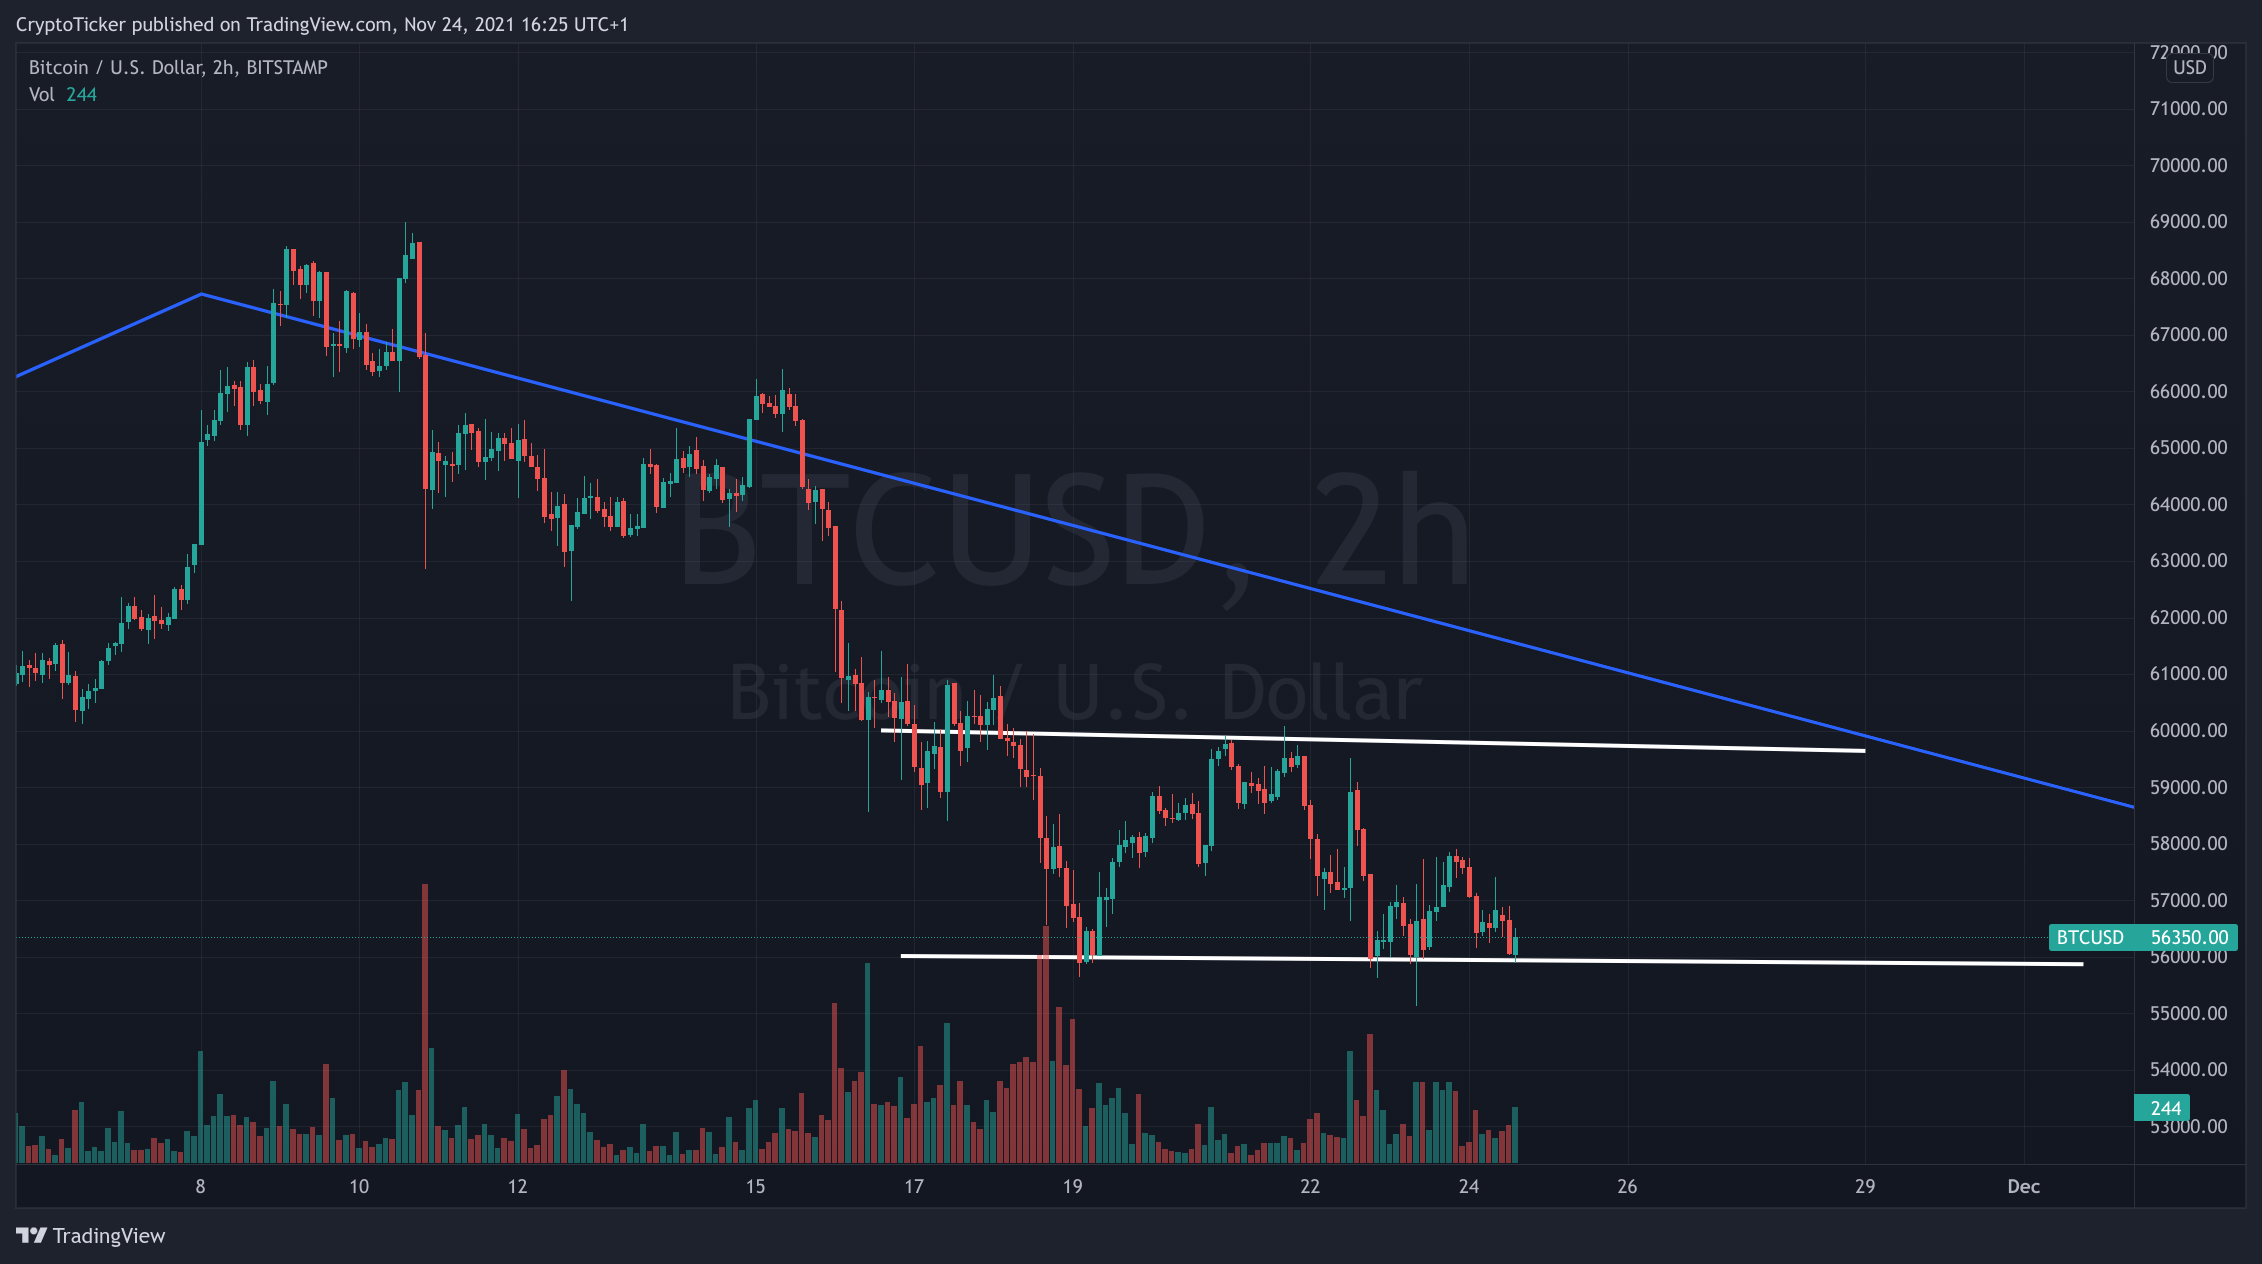 BTC/USD 2-hours chart showing a short-term consolidation